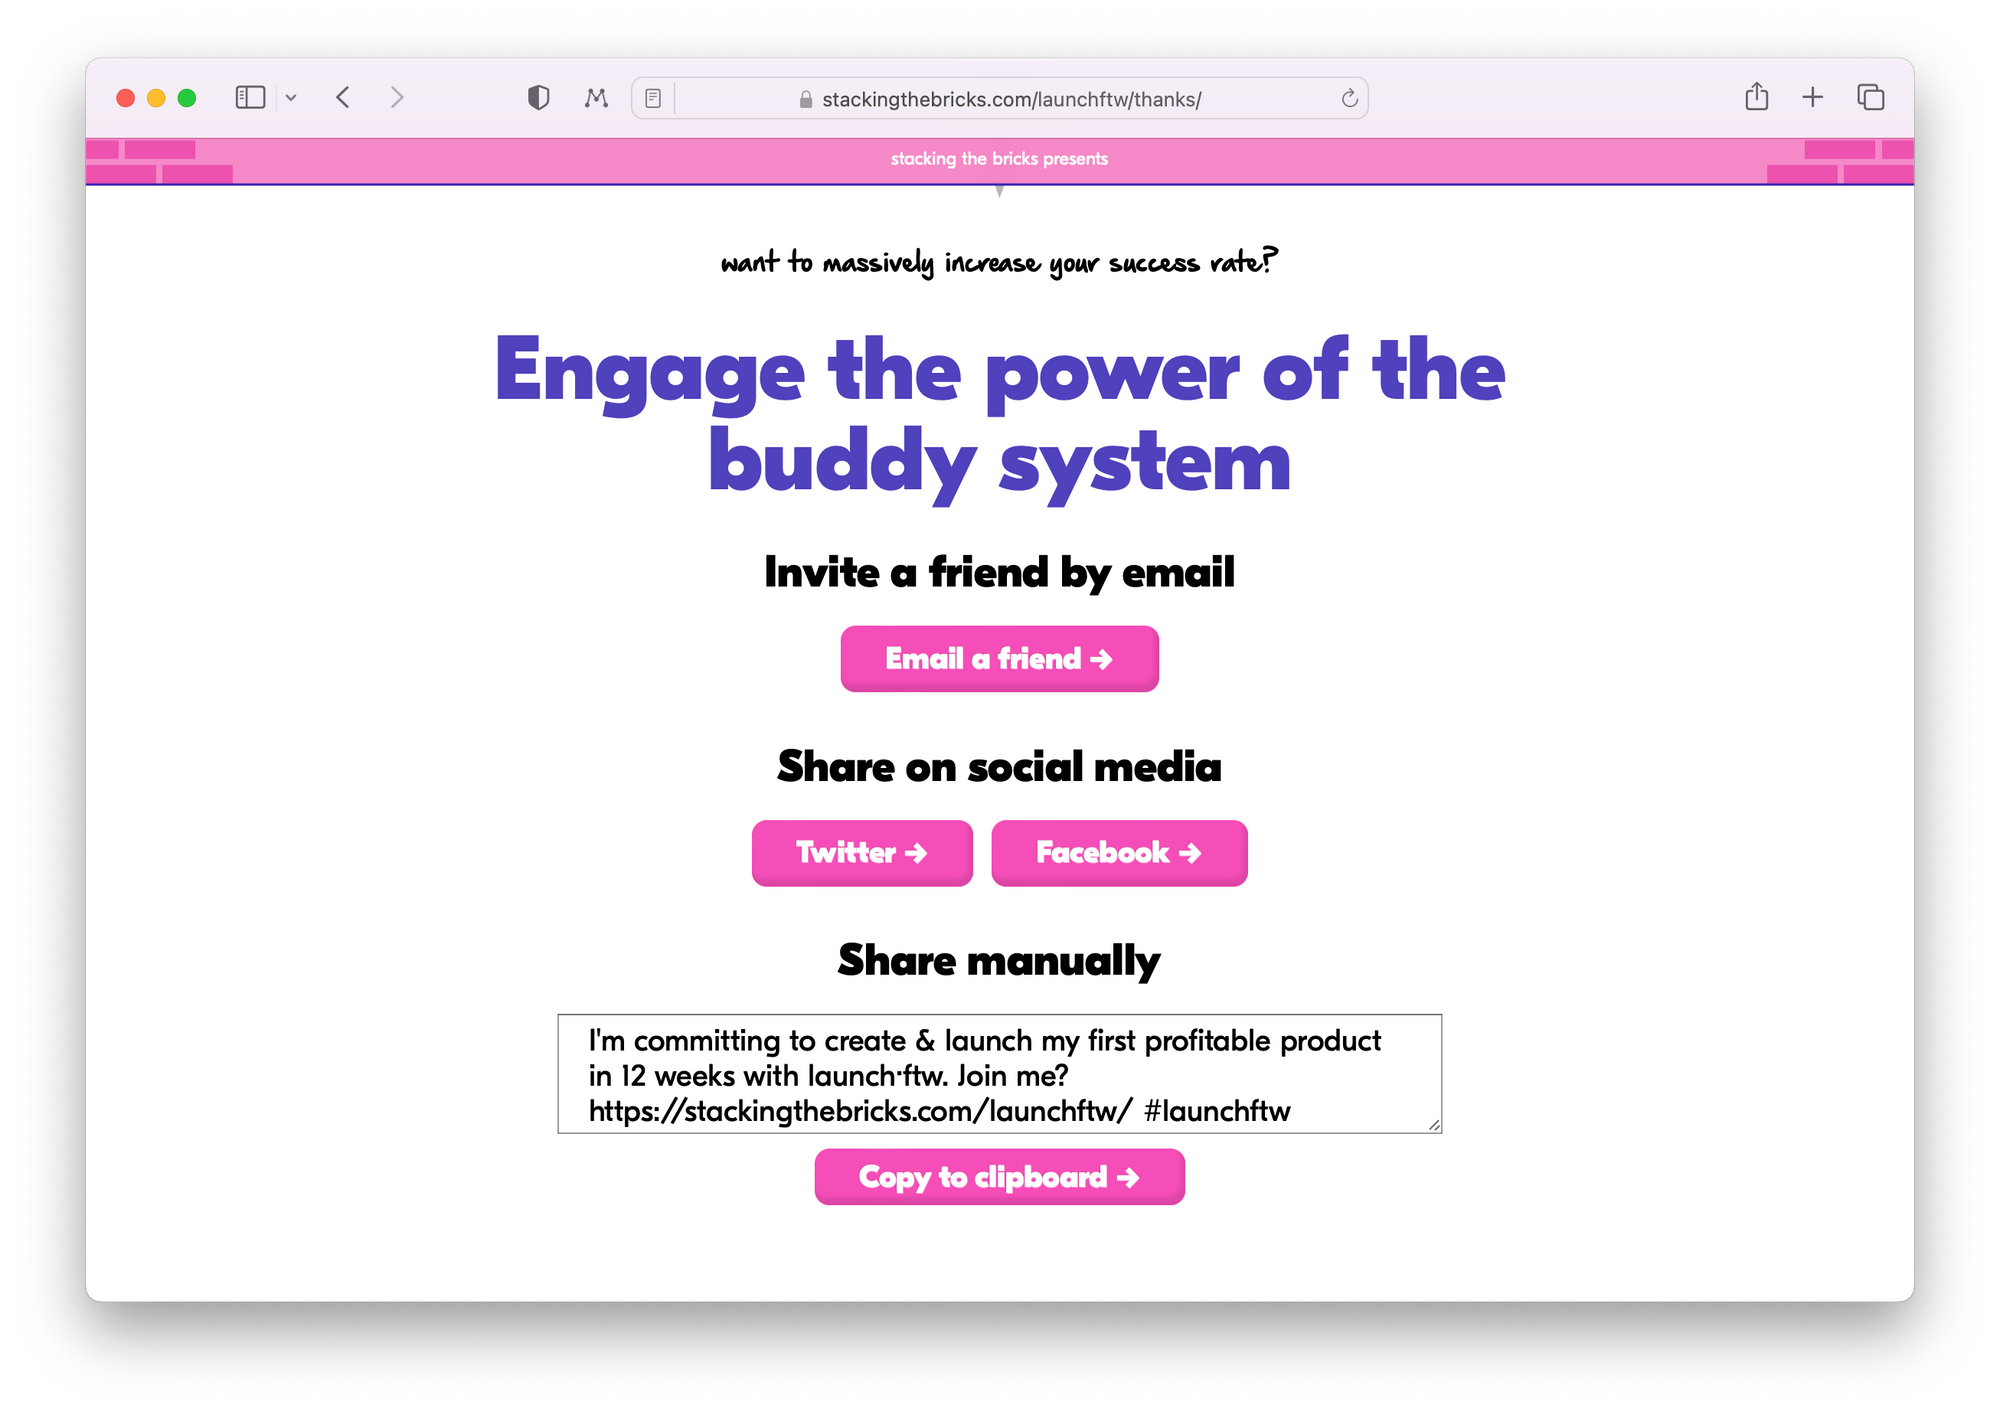 Thank you page with share buttons. Headline says "Engage the power of the buddy system."